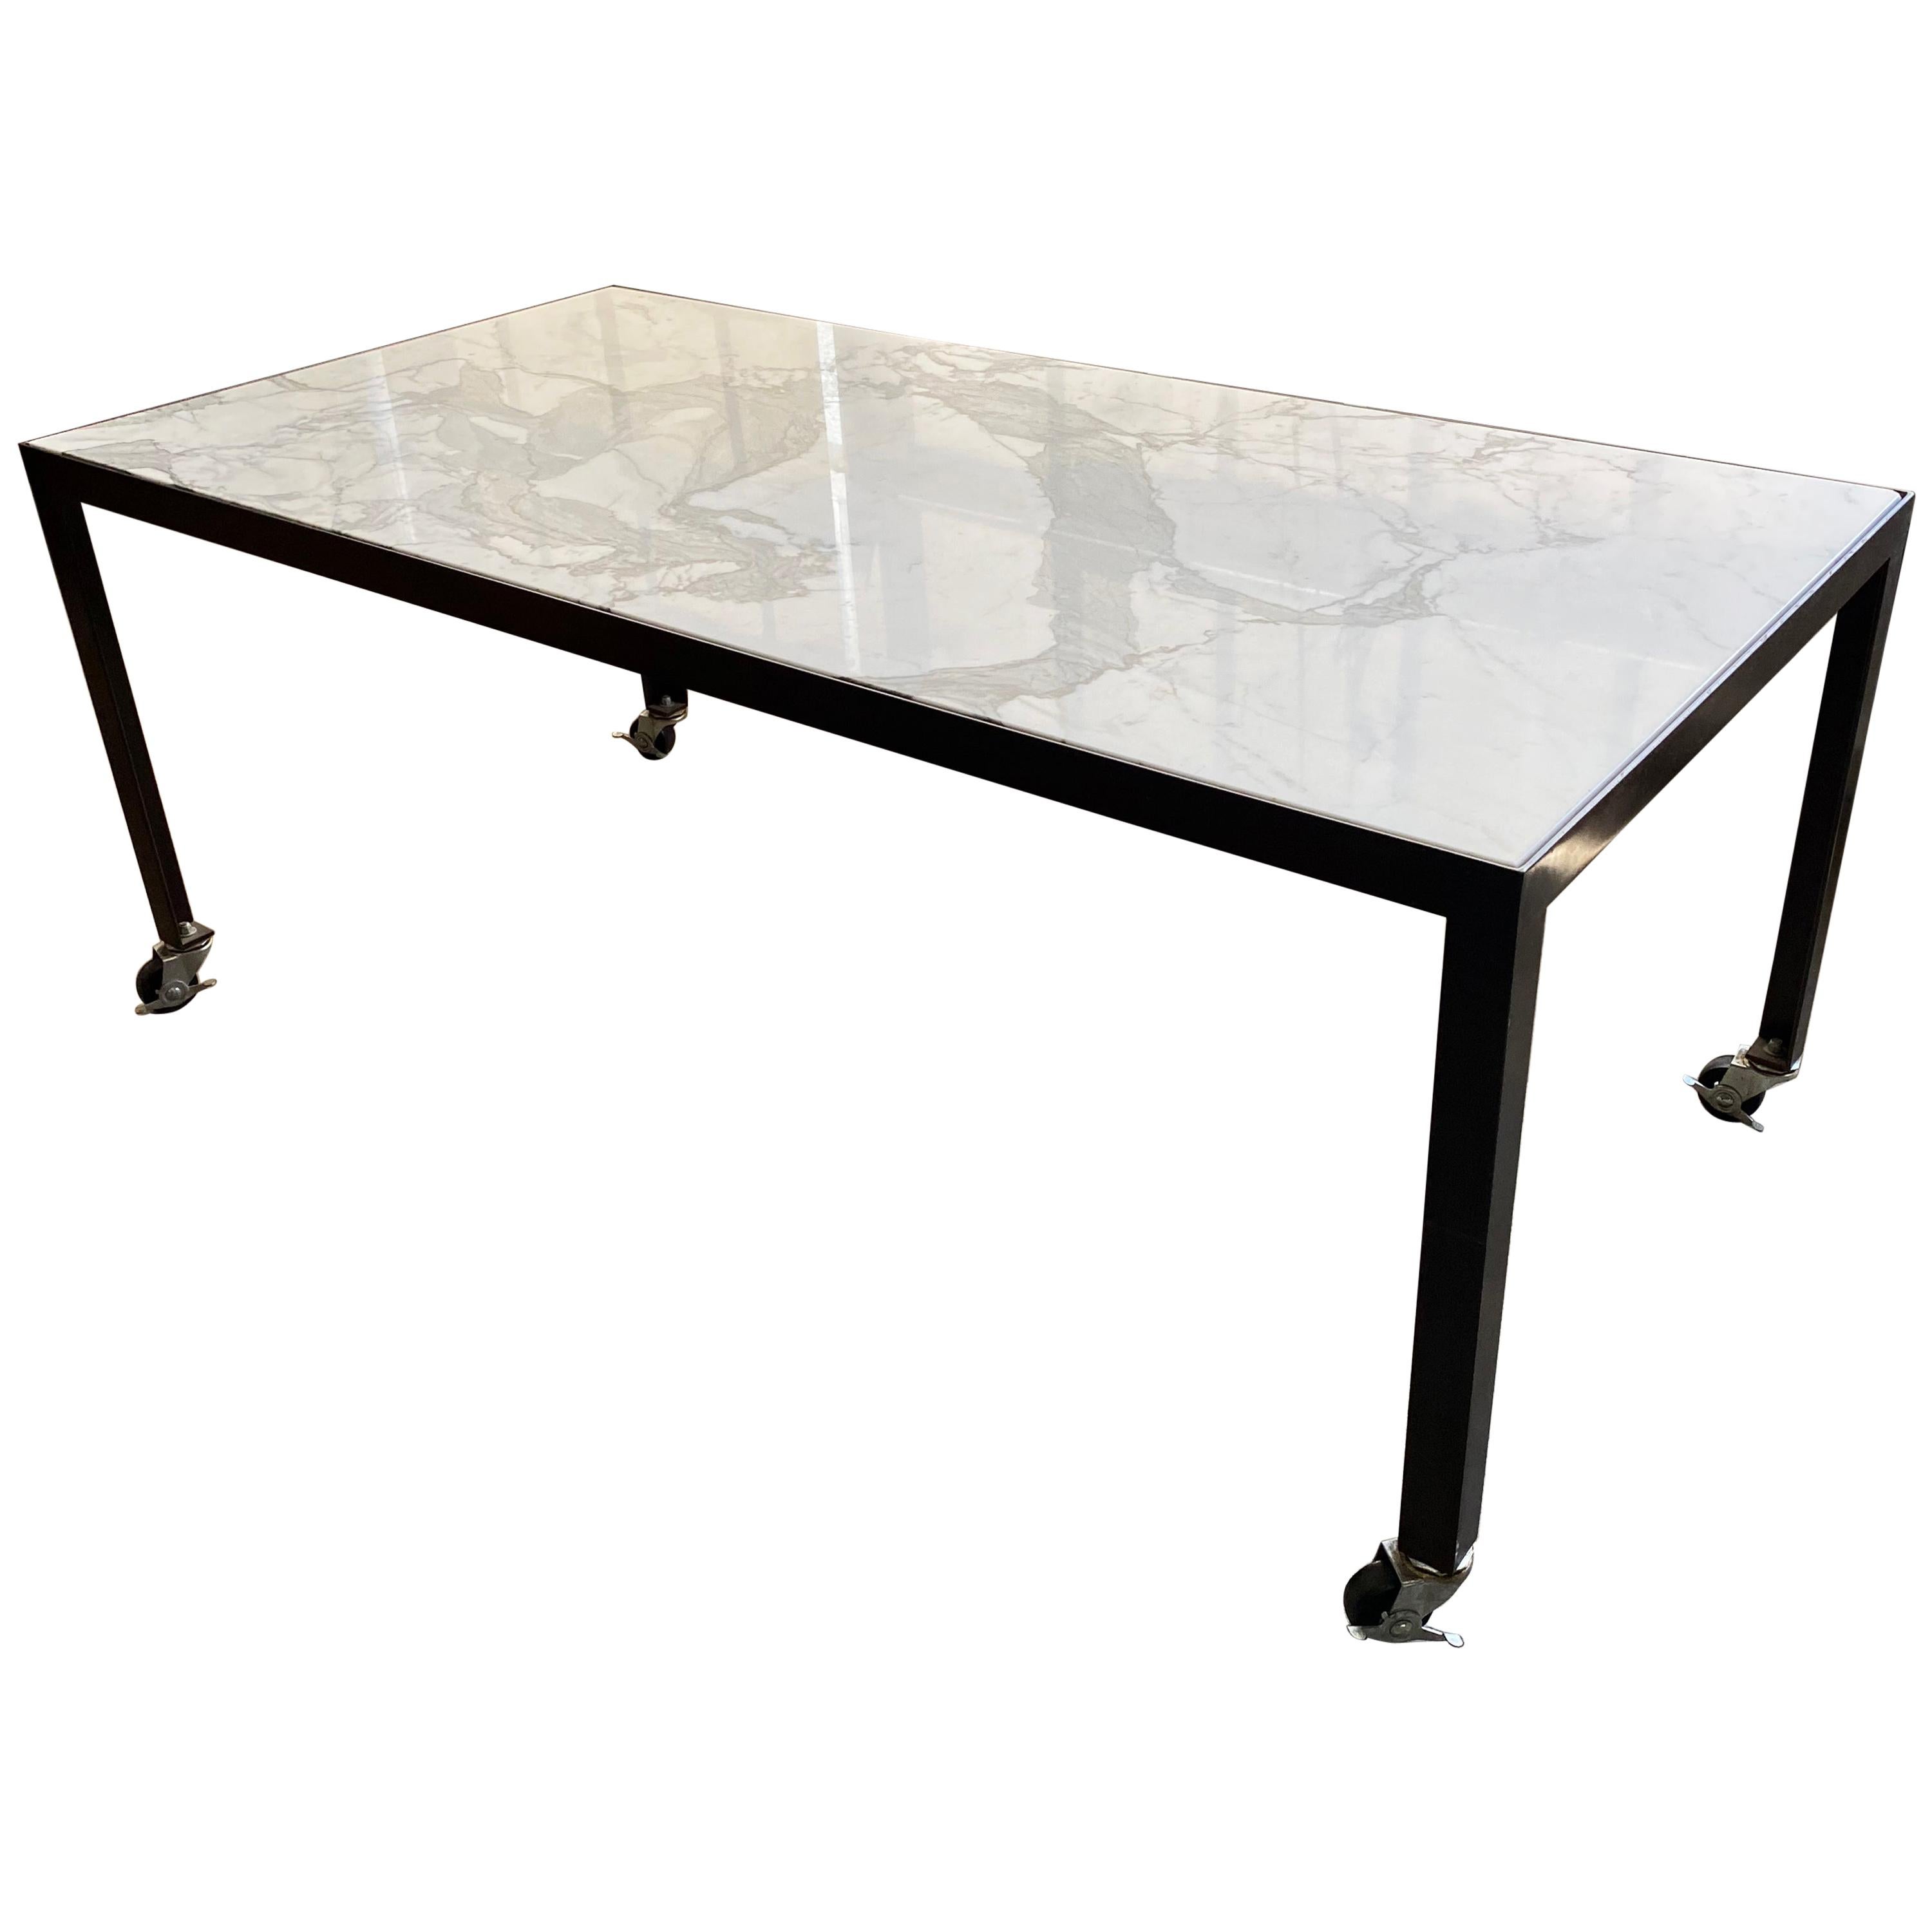 Stone Top Meeting Table by Javier Robles, Calacatta Marble, Blackened Steel For Sale